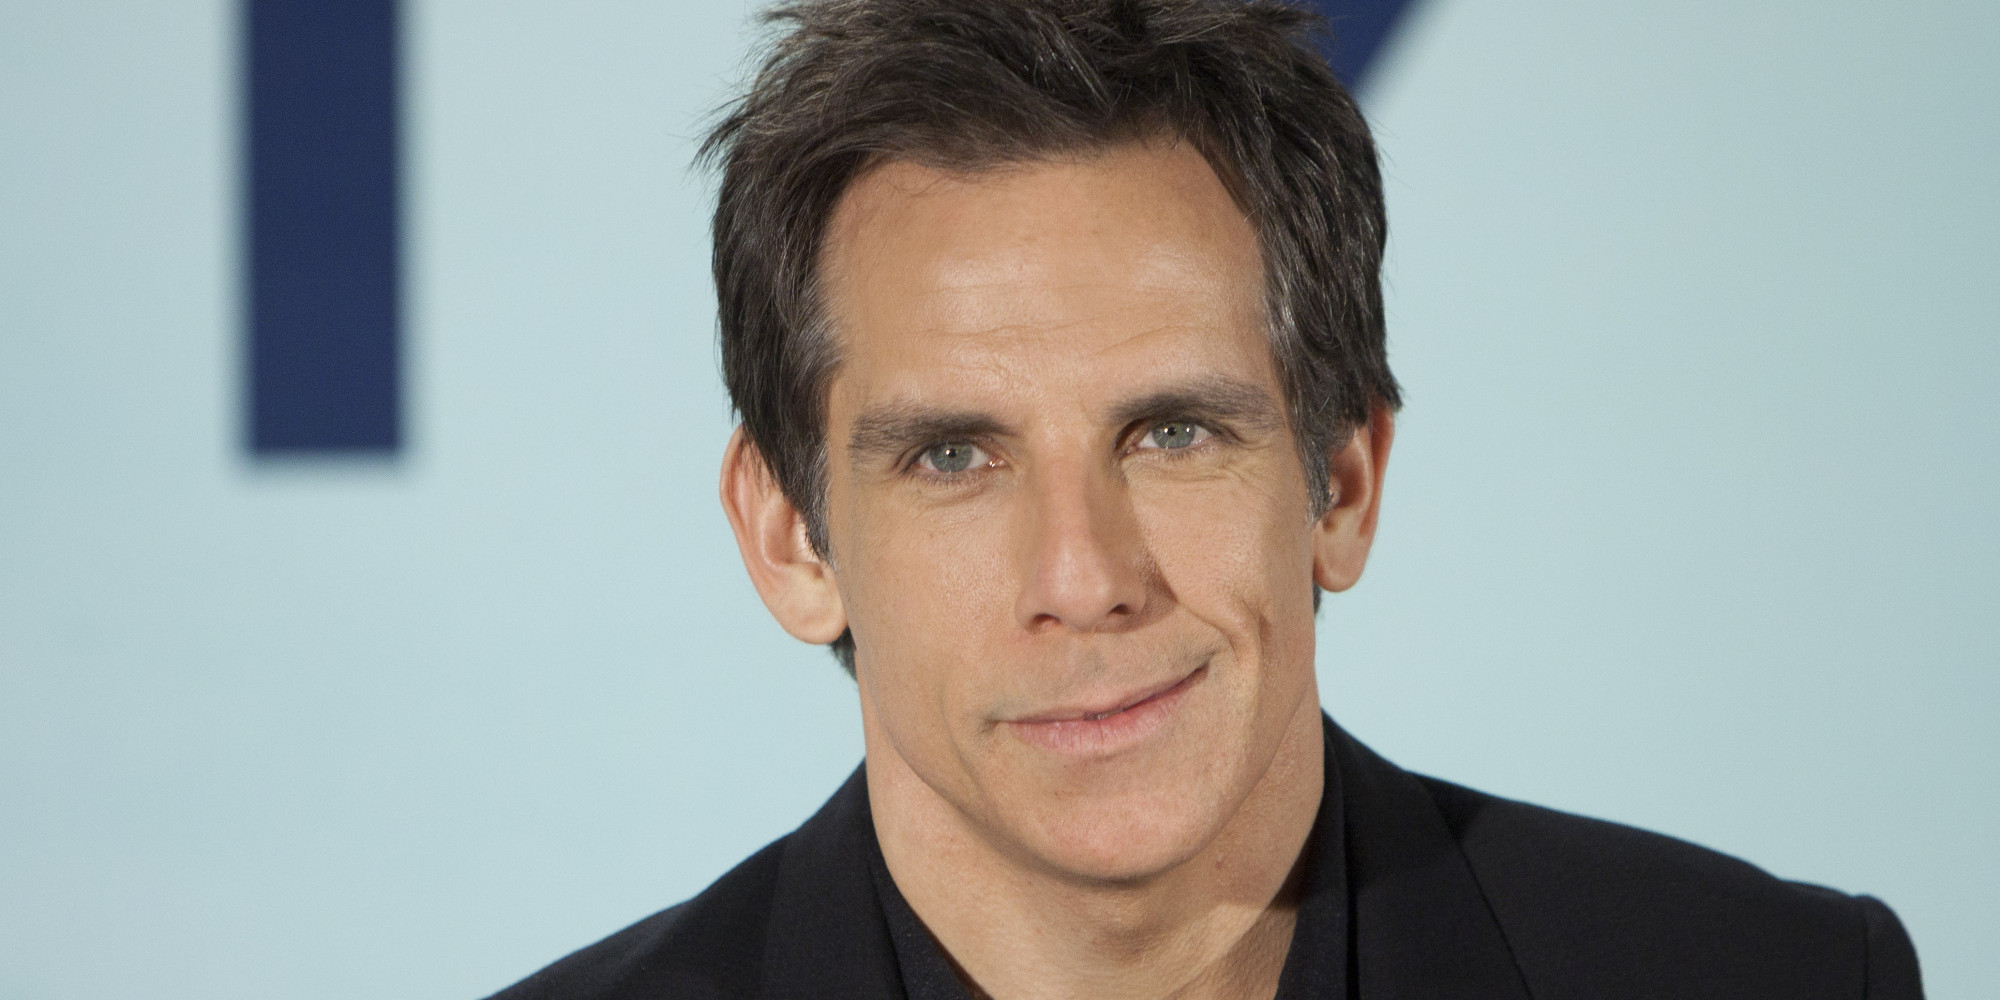 US actor Ben Stiller poses during the photocall of 'The Secret Life of Walter Mitty' at Villamagna Hotel in Madrid, Spain, Monday December 16, 2013. (AP Photo/Abraham Caro Marin)